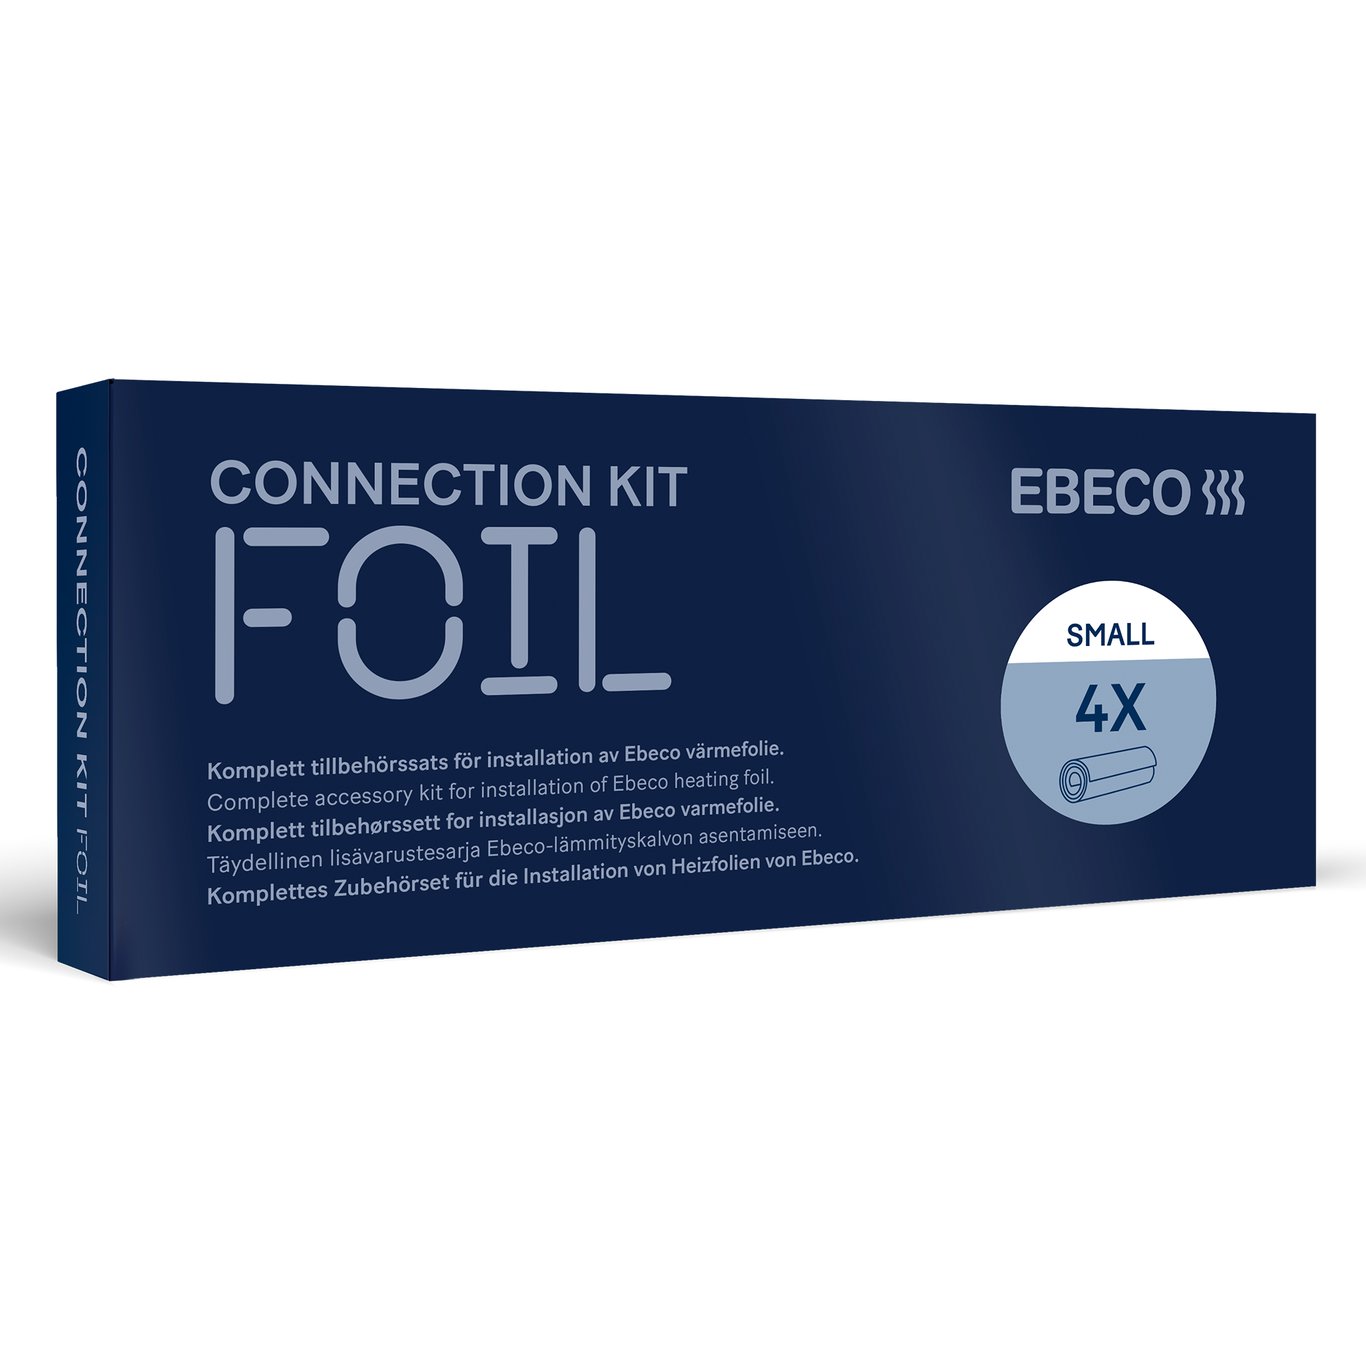 EBECO CONNECTION KIT FOIL, SMALL